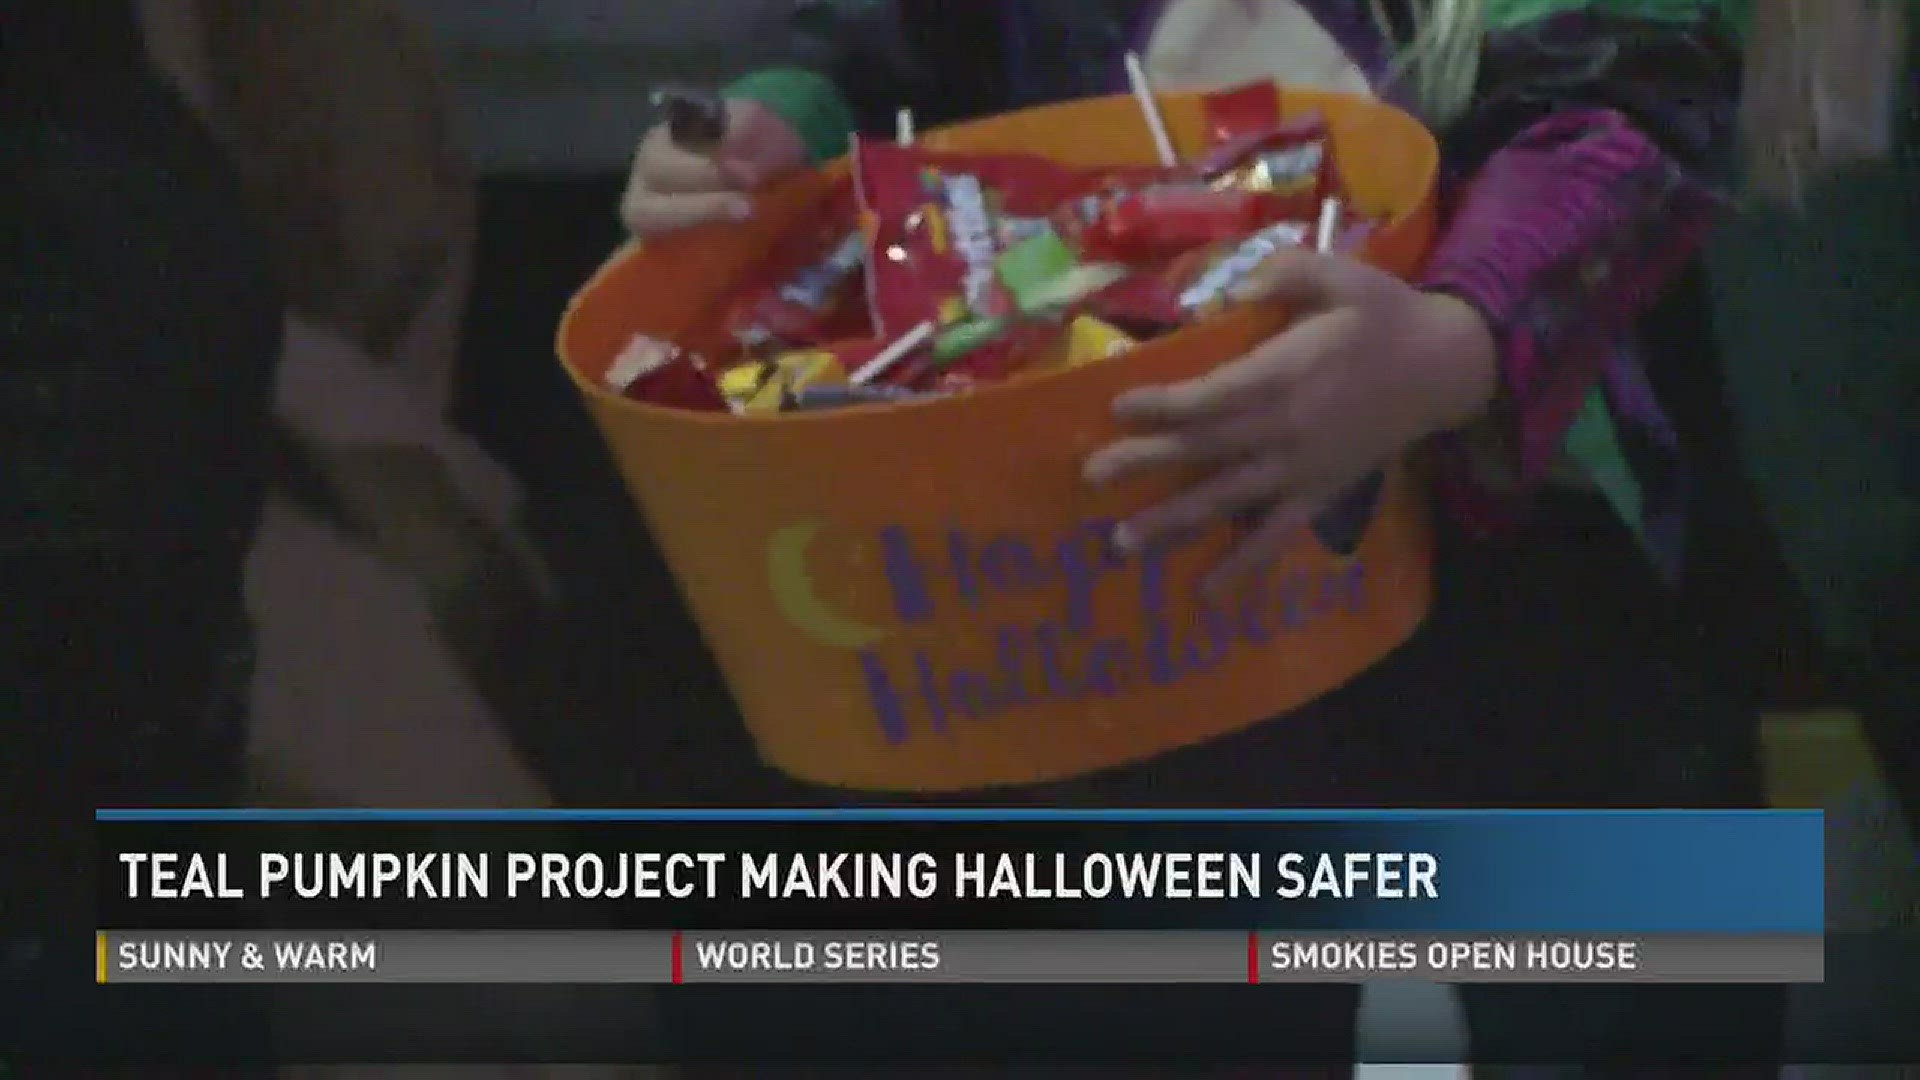 Oct. 27, 2016: For kids with allergies, Halloween can often bring more tricks than treats. The Teal Pumpkin Project is helping those kids have a safer Halloween.